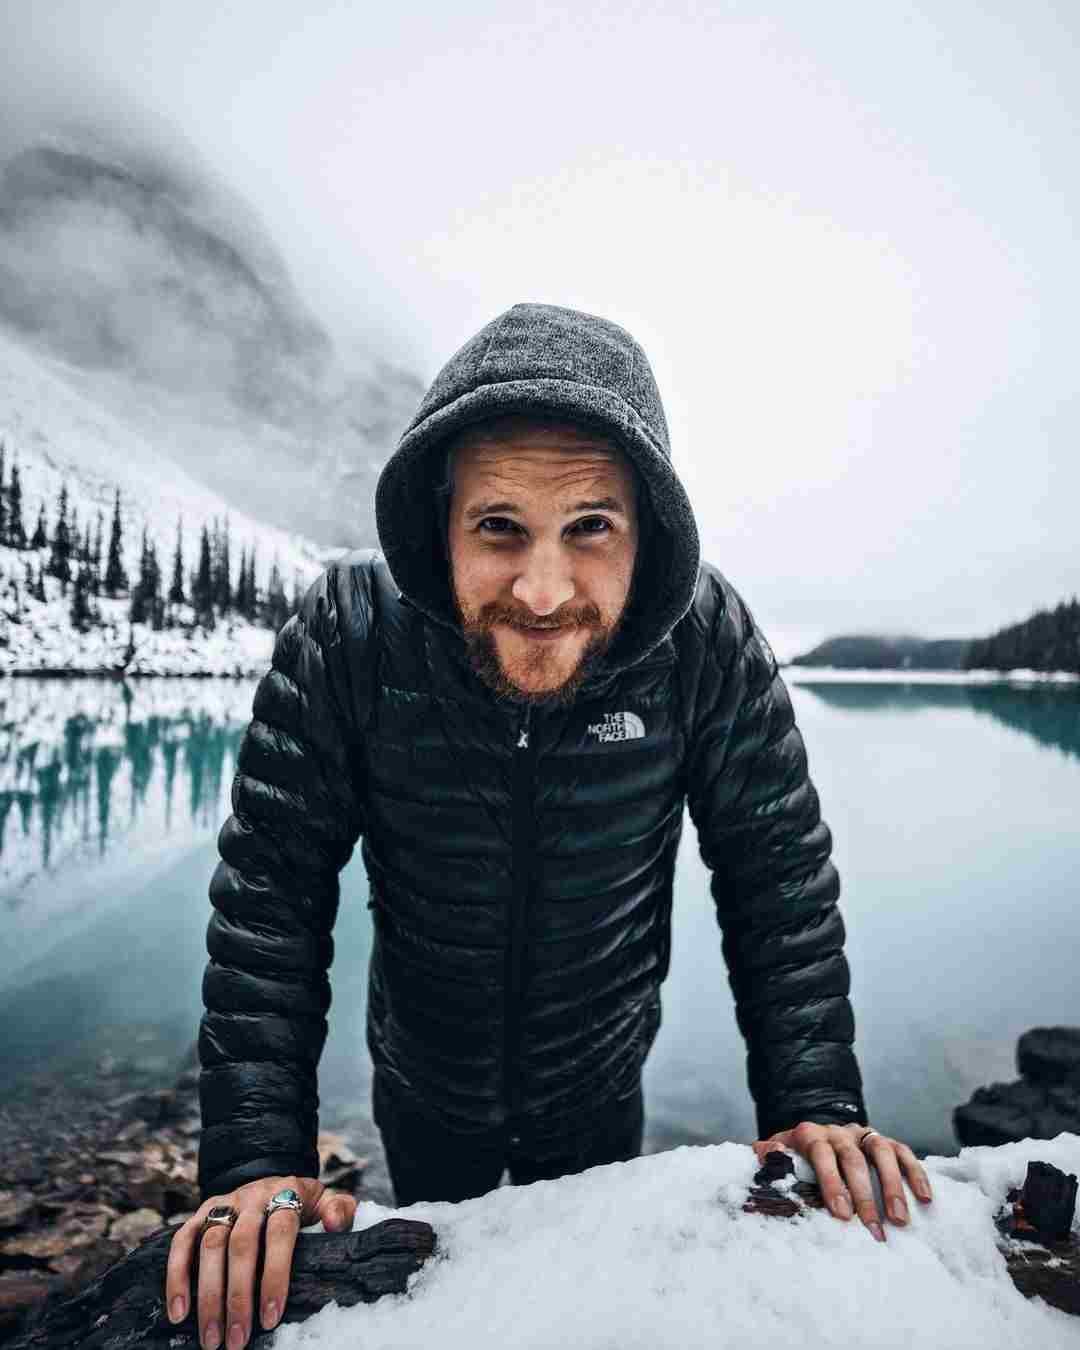 Peter McKinnon Biography | Wiki, wife, age, height, birthday, net worth, photography, & More